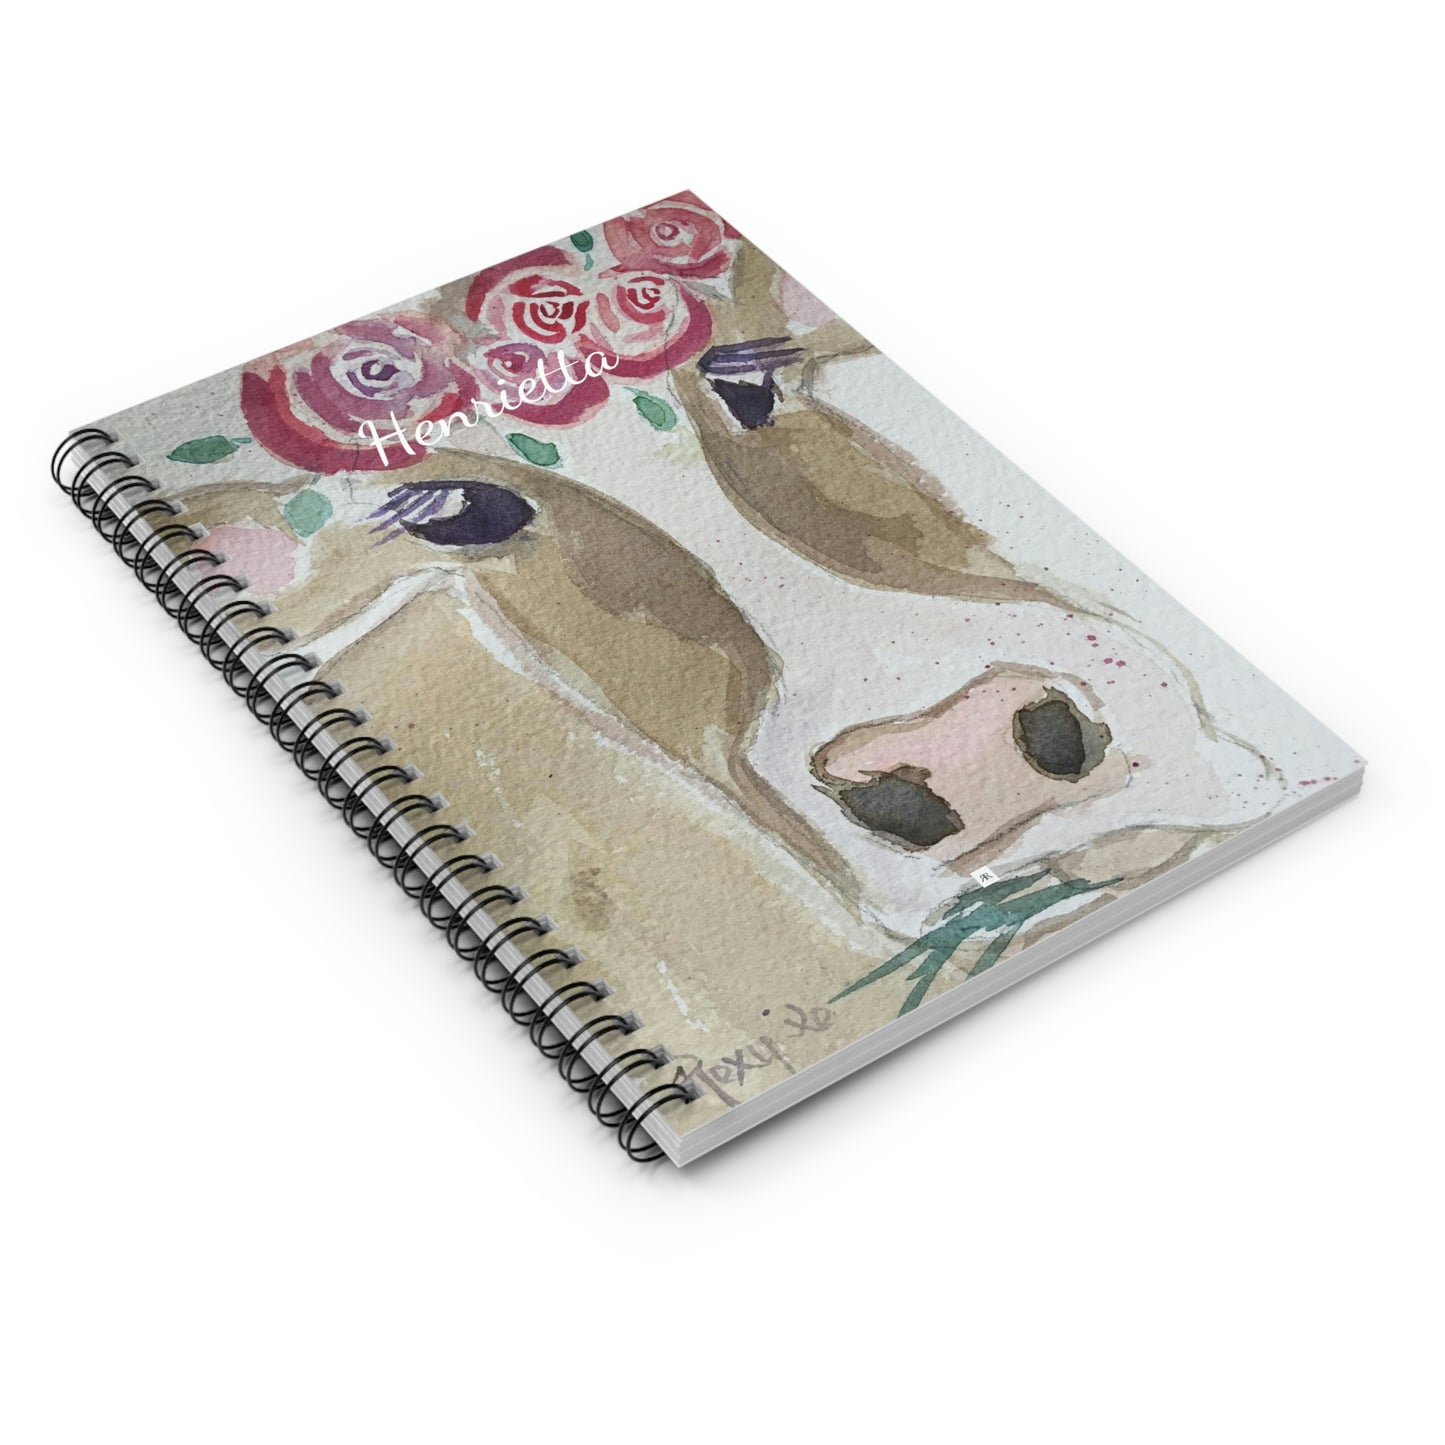 Herietta -Whimsical Cow Painting Spiral Notebook